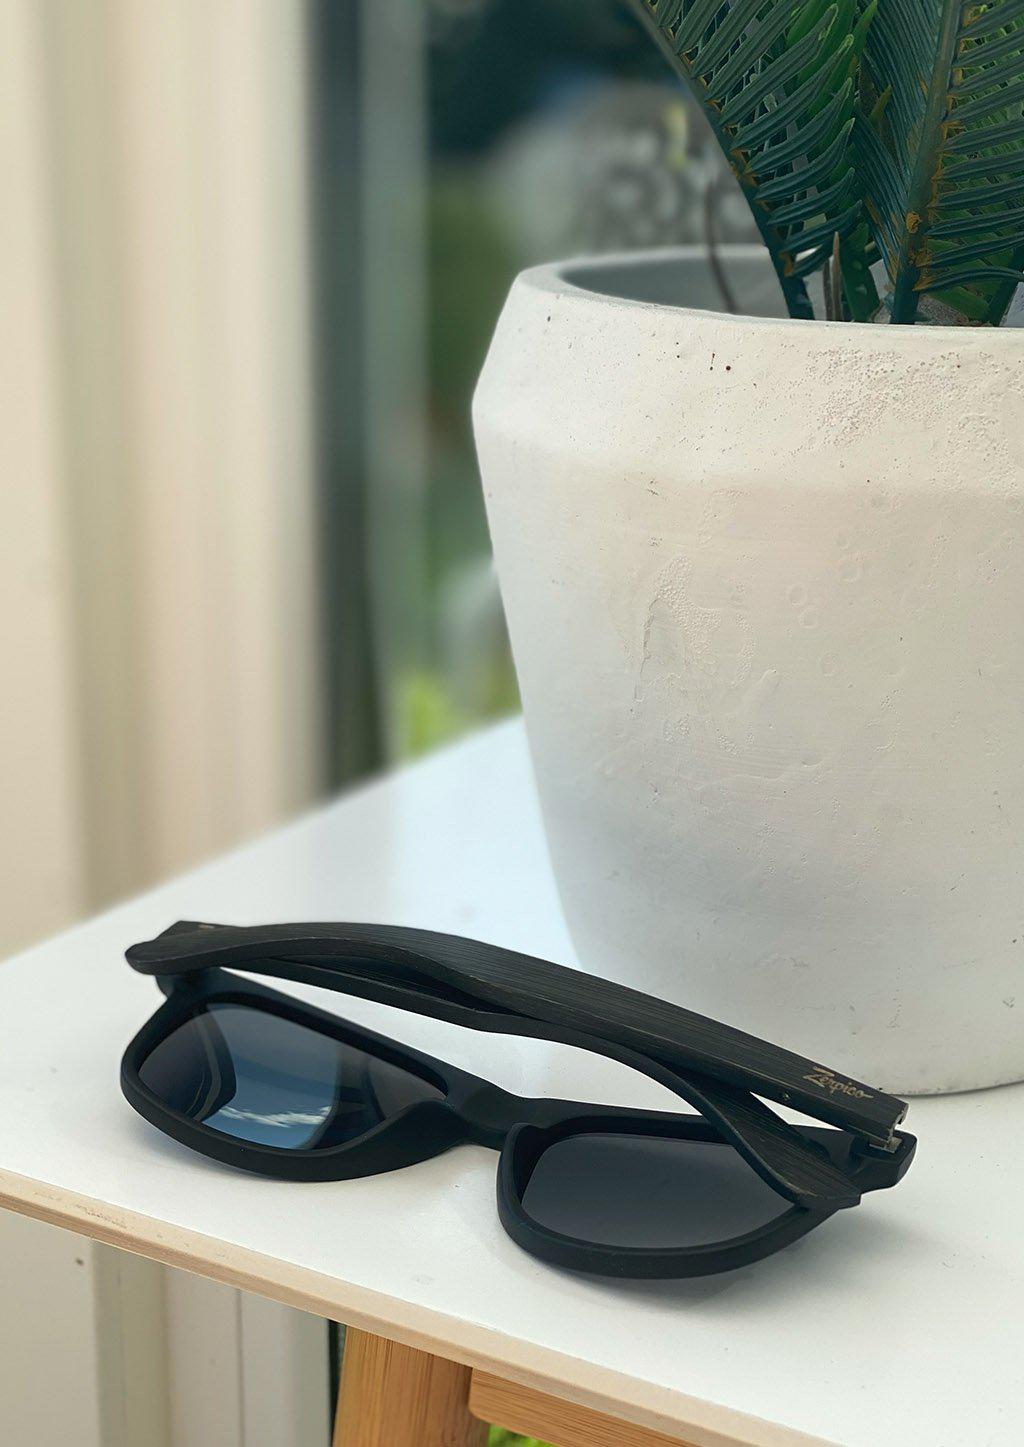 Handmade wooden wayfarers in wood and are guaranteed to give you a natural feeling of comfort and design.  Andariel is a walnut wooden model with black matte plastic front. This special edition pair is made to stand out. Another lifestyle photo showing the colors.